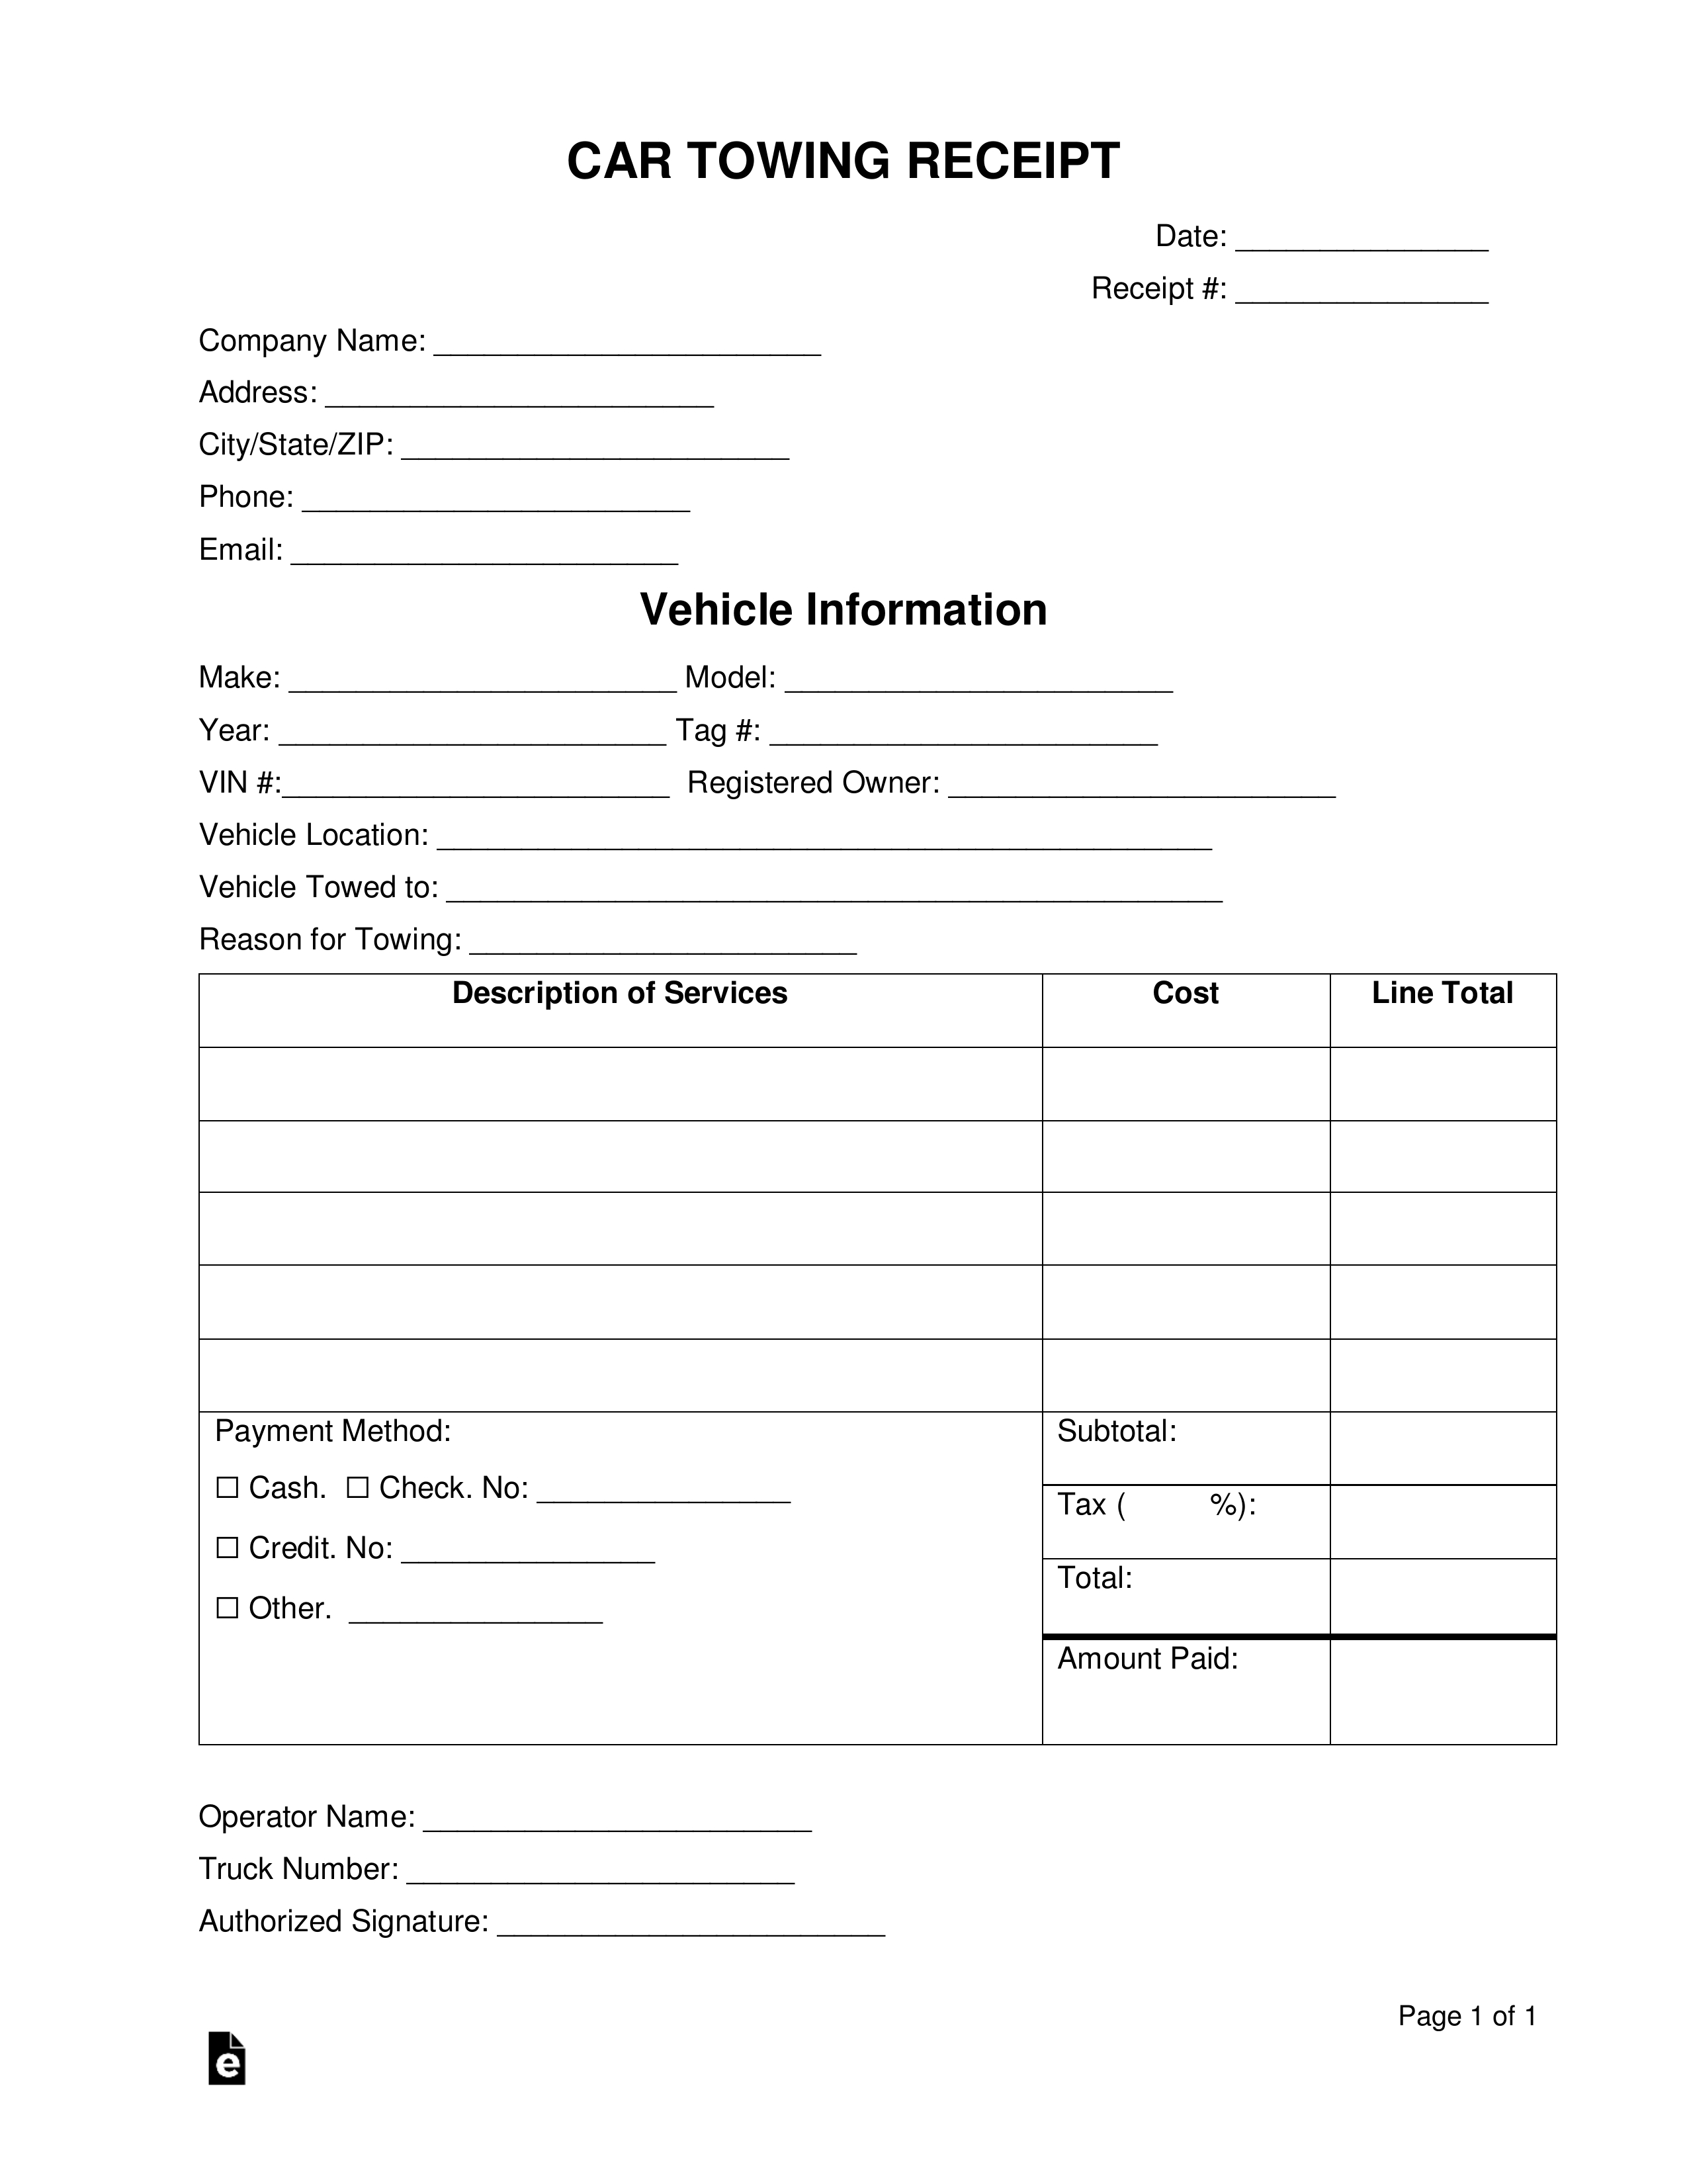 Free Towing Invoice Receipt Templates